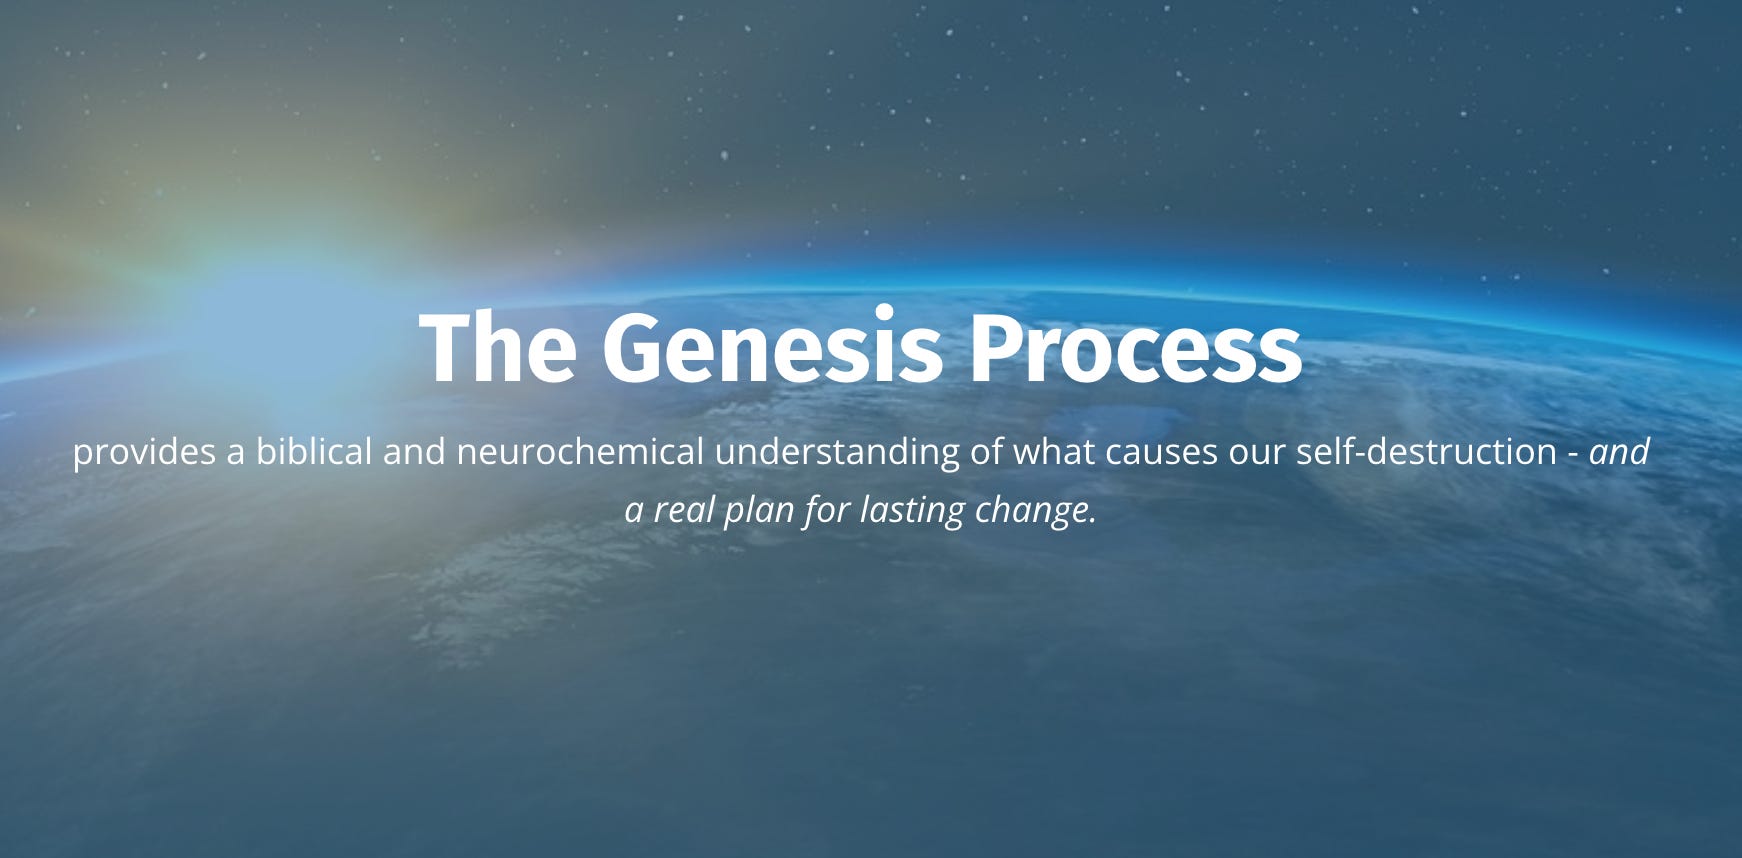 Image of the contour of the earth from space, with wording that reads: The Genesis Process provides a biblical and neurochemical understanding of what causes our self-destruction - and a real plan for lasting change.